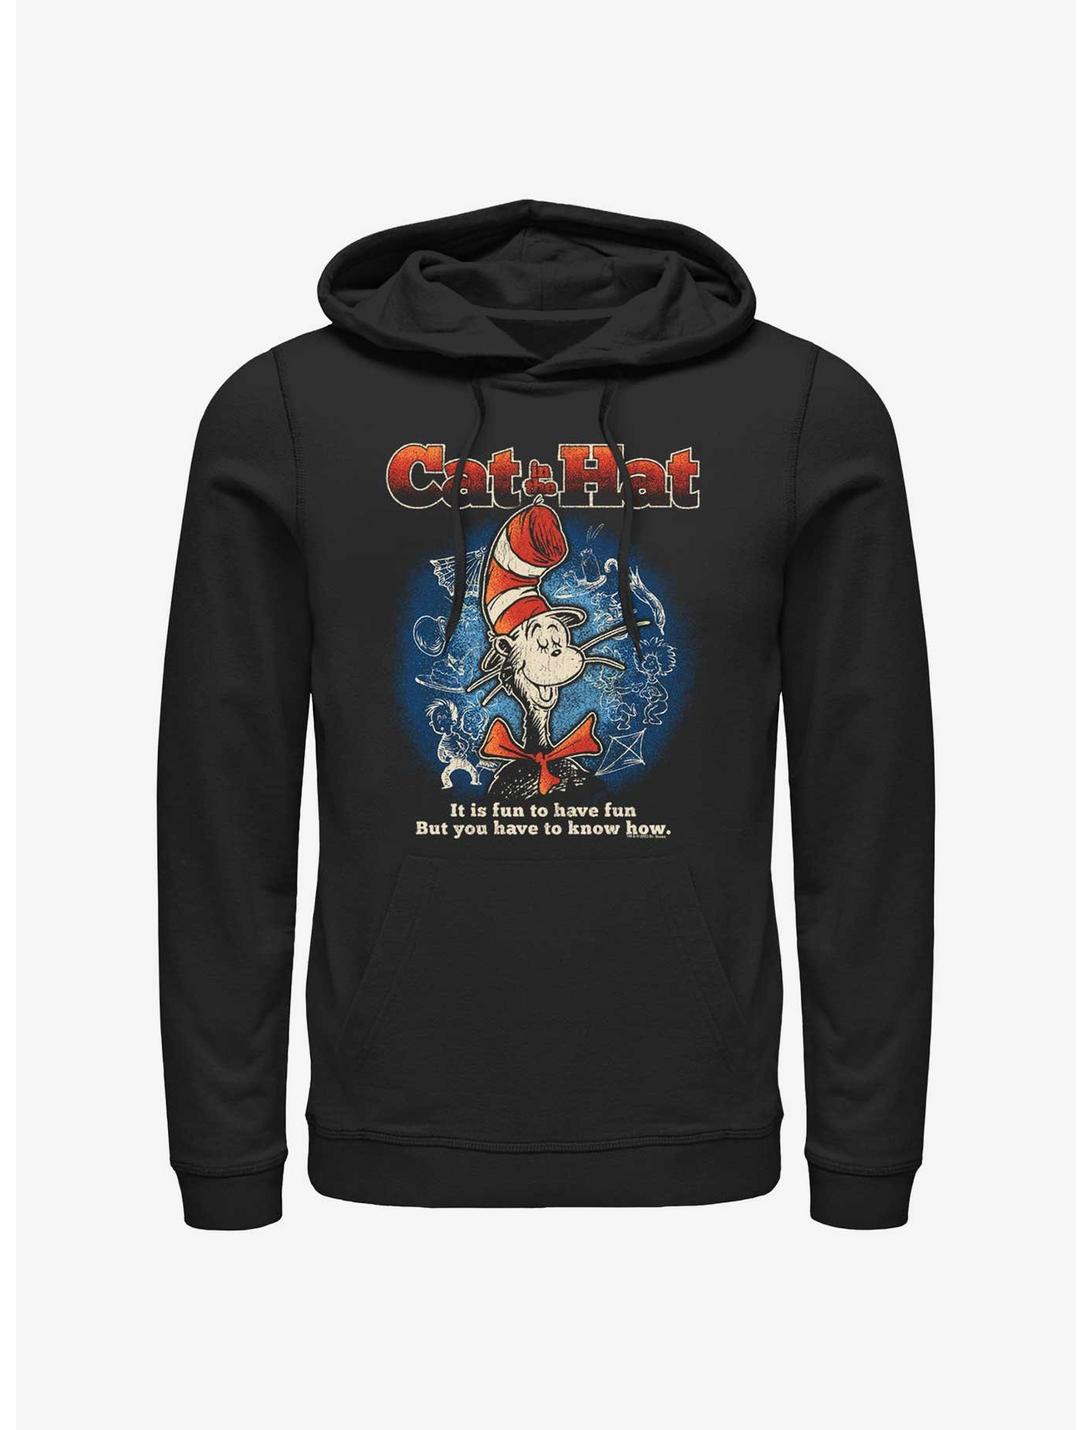 Dr. Seuss's Cat In The Hat Fun To Have Fun Hoodie, BLACK, hi-res